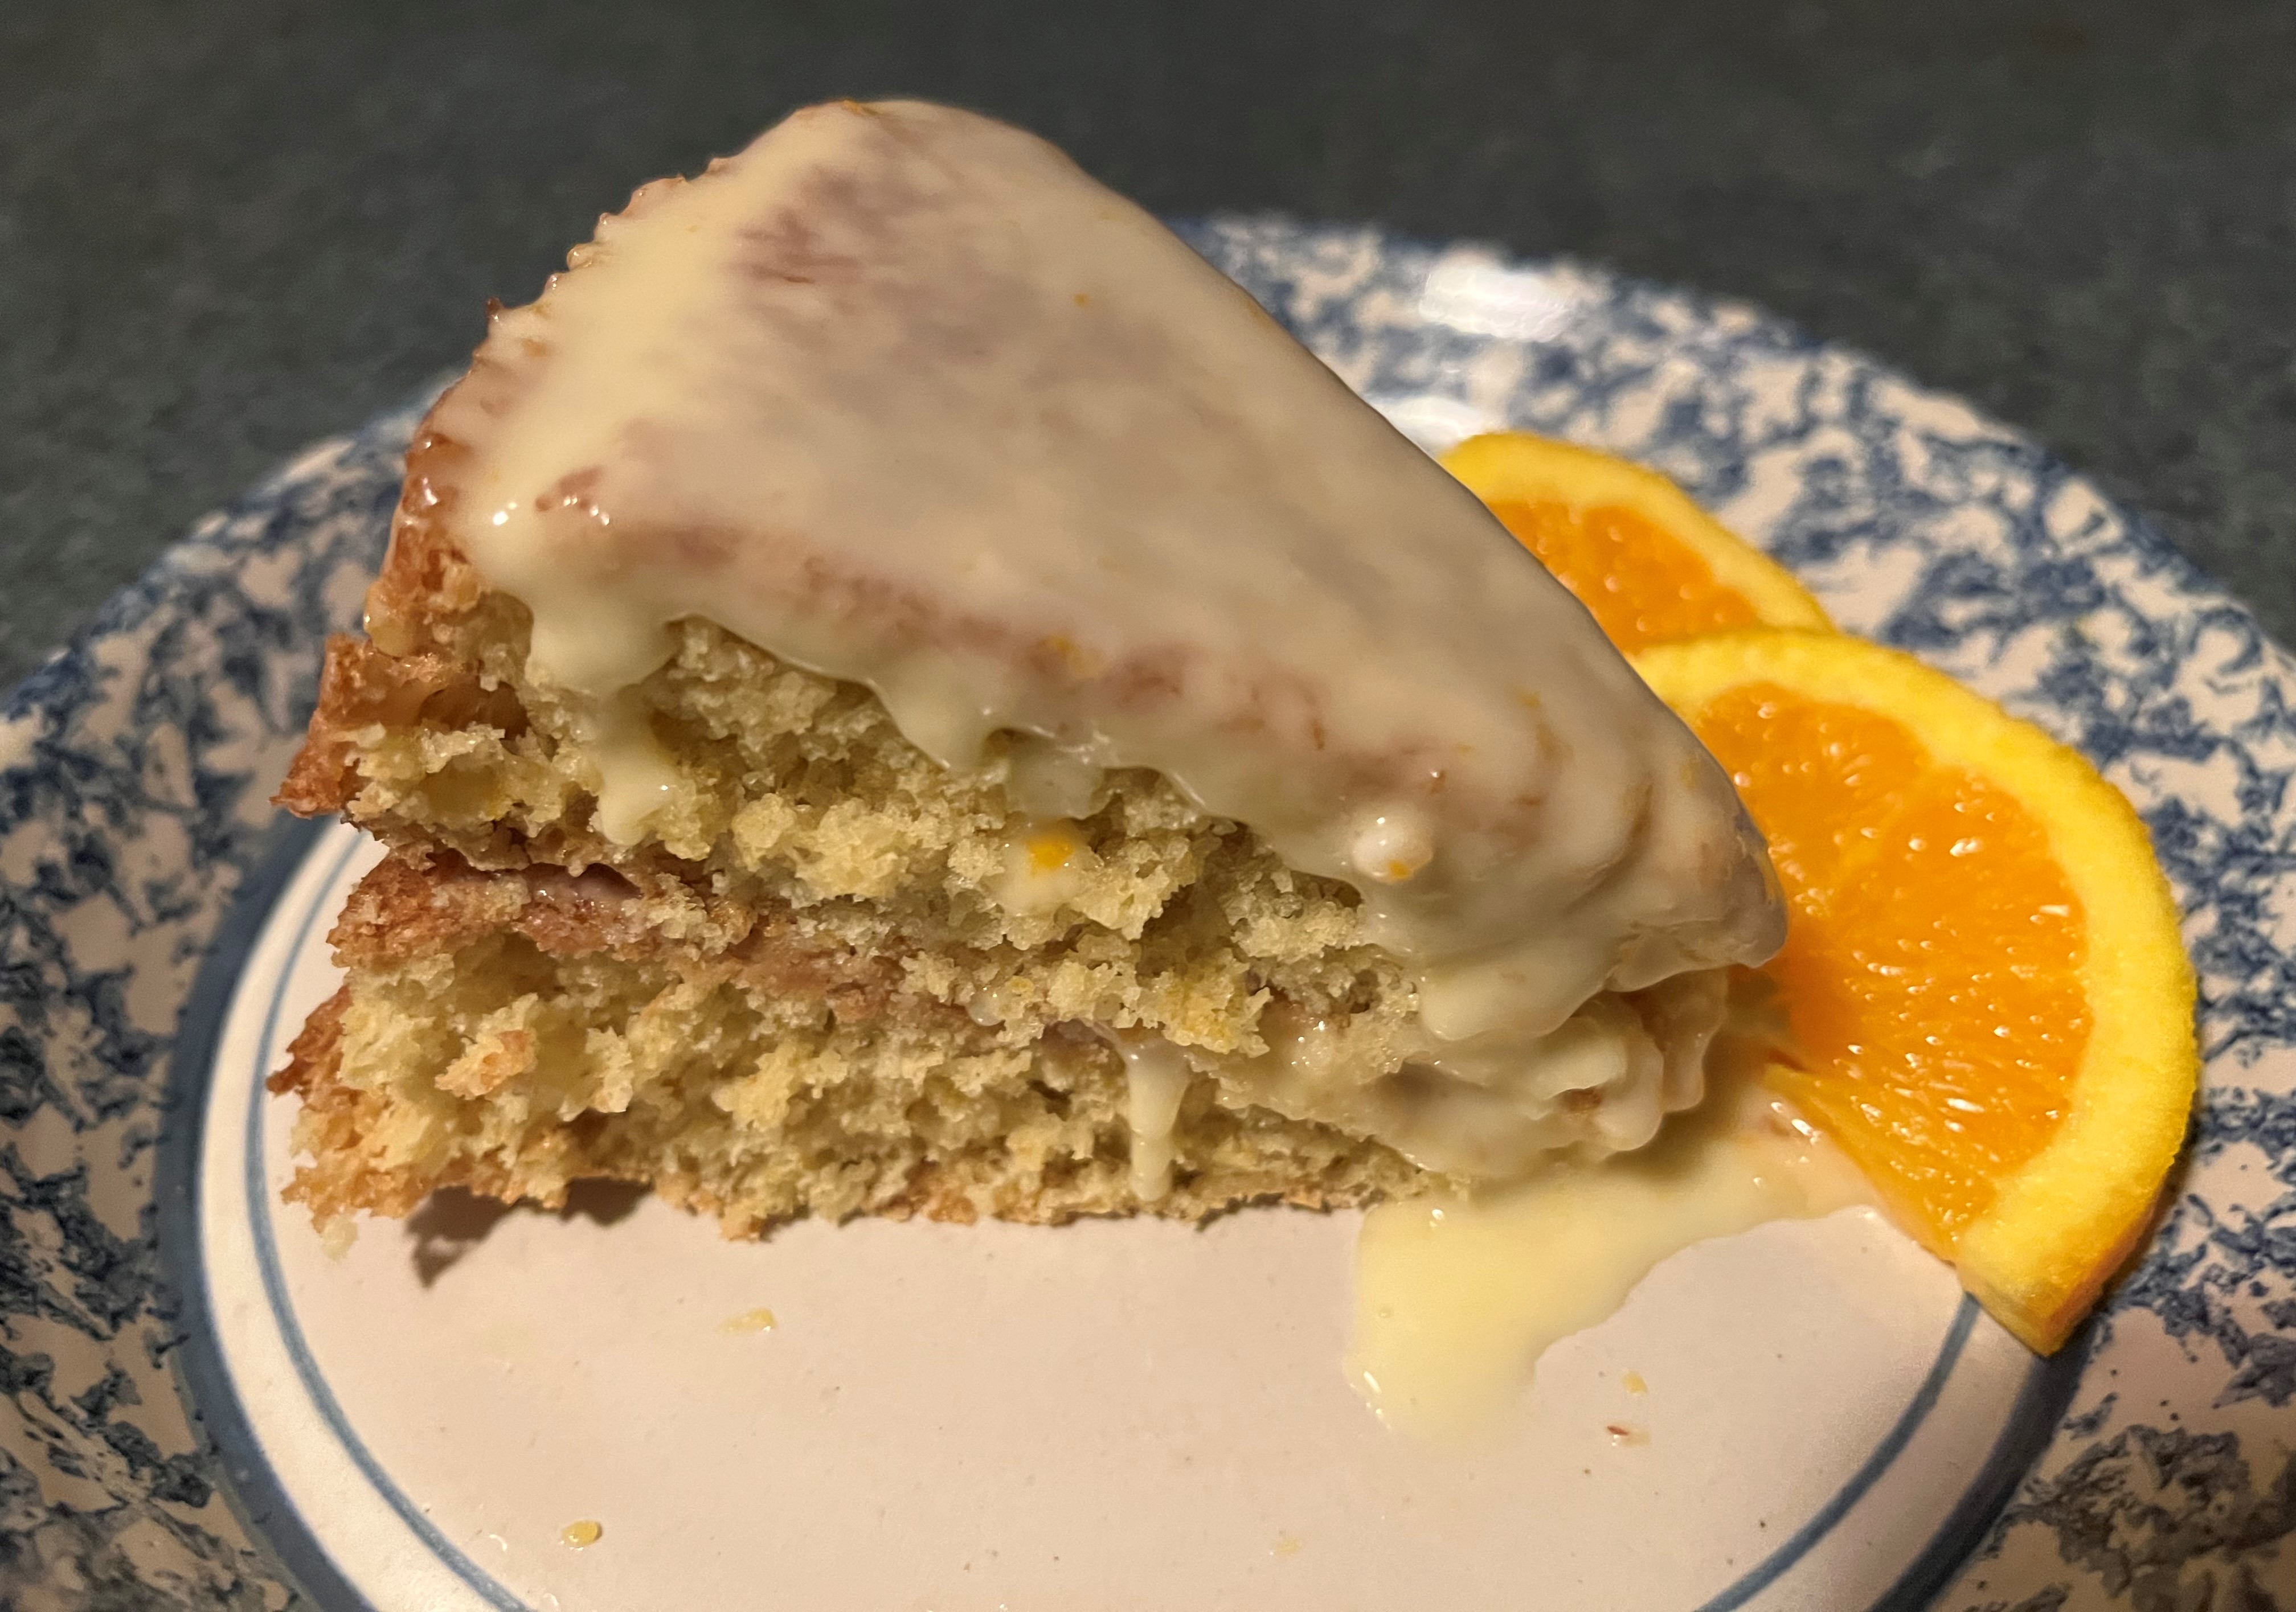 A slice of orange cake topped with icing sits on a plate next to two orange slices.